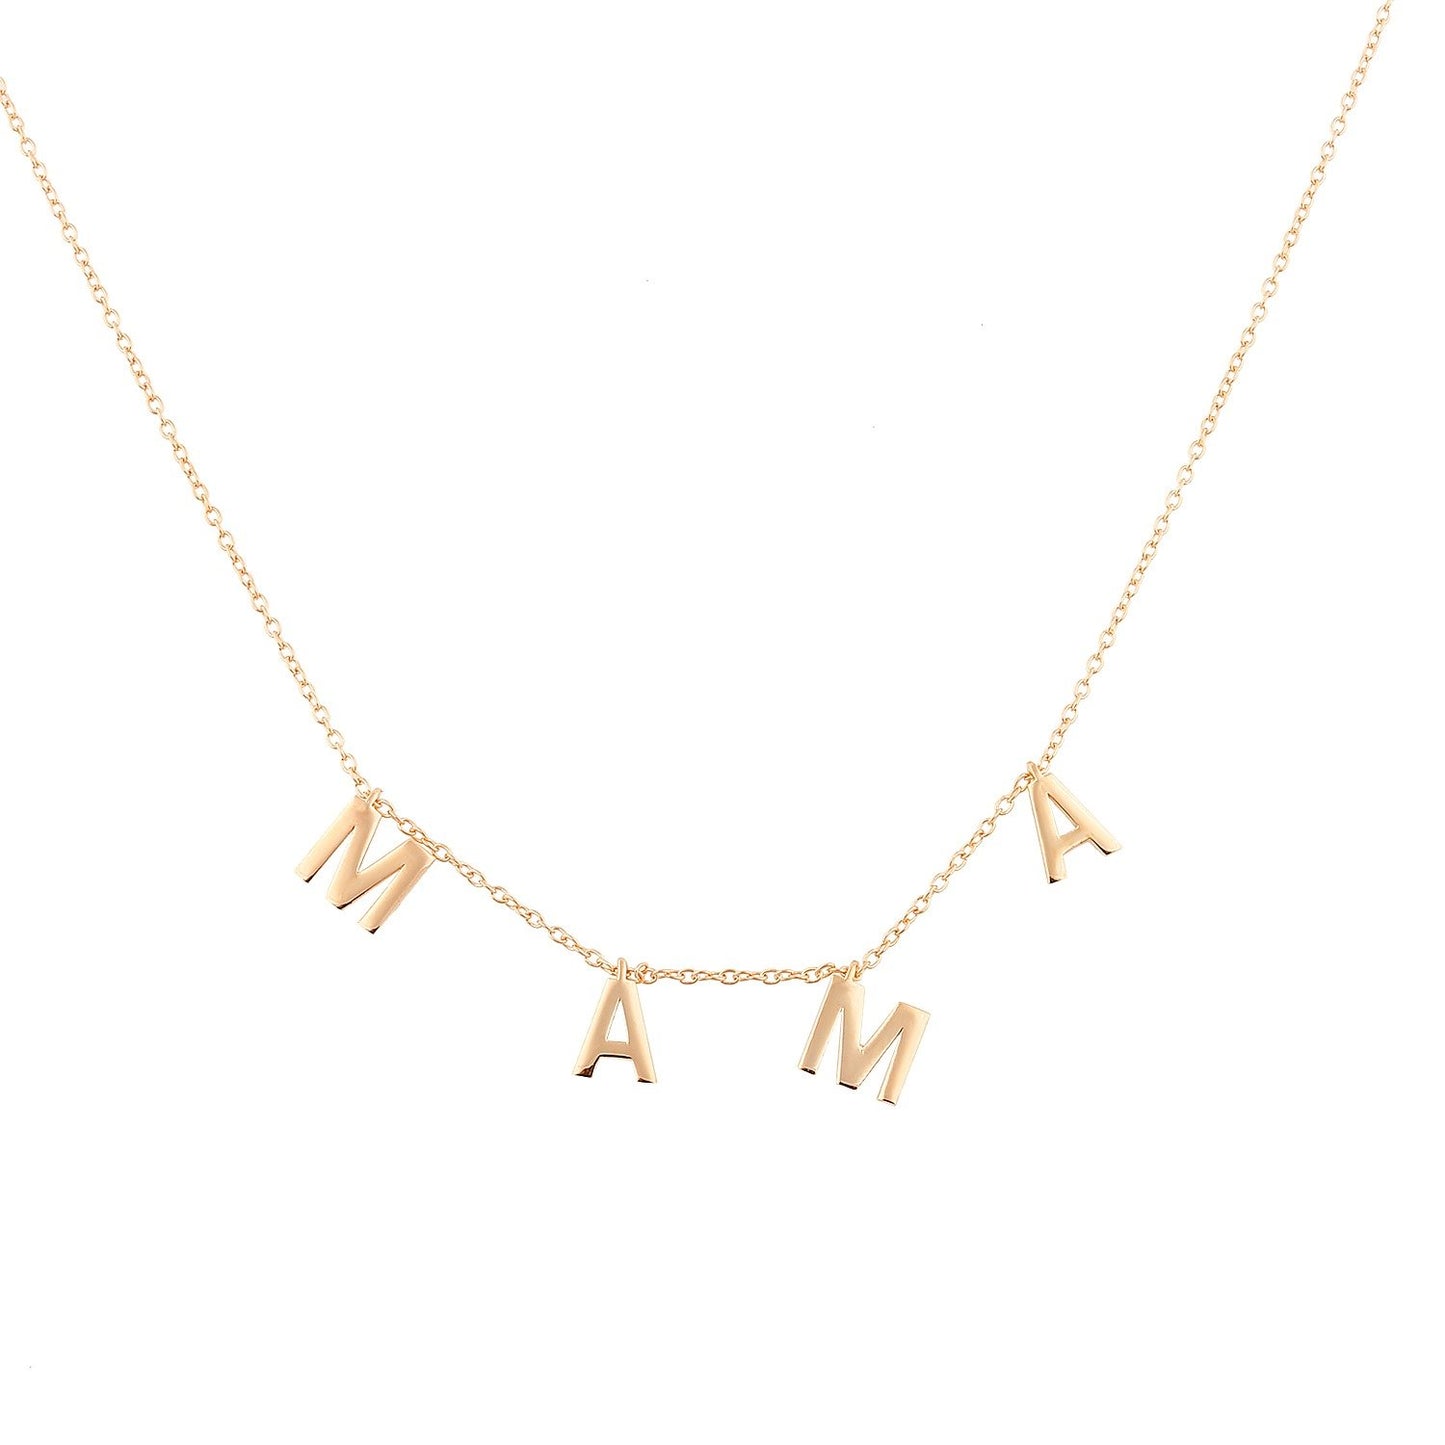 It’s All in a Name™ MAMA Necklace JEWELRY The Sis Kiss Rose Gold No Crystals